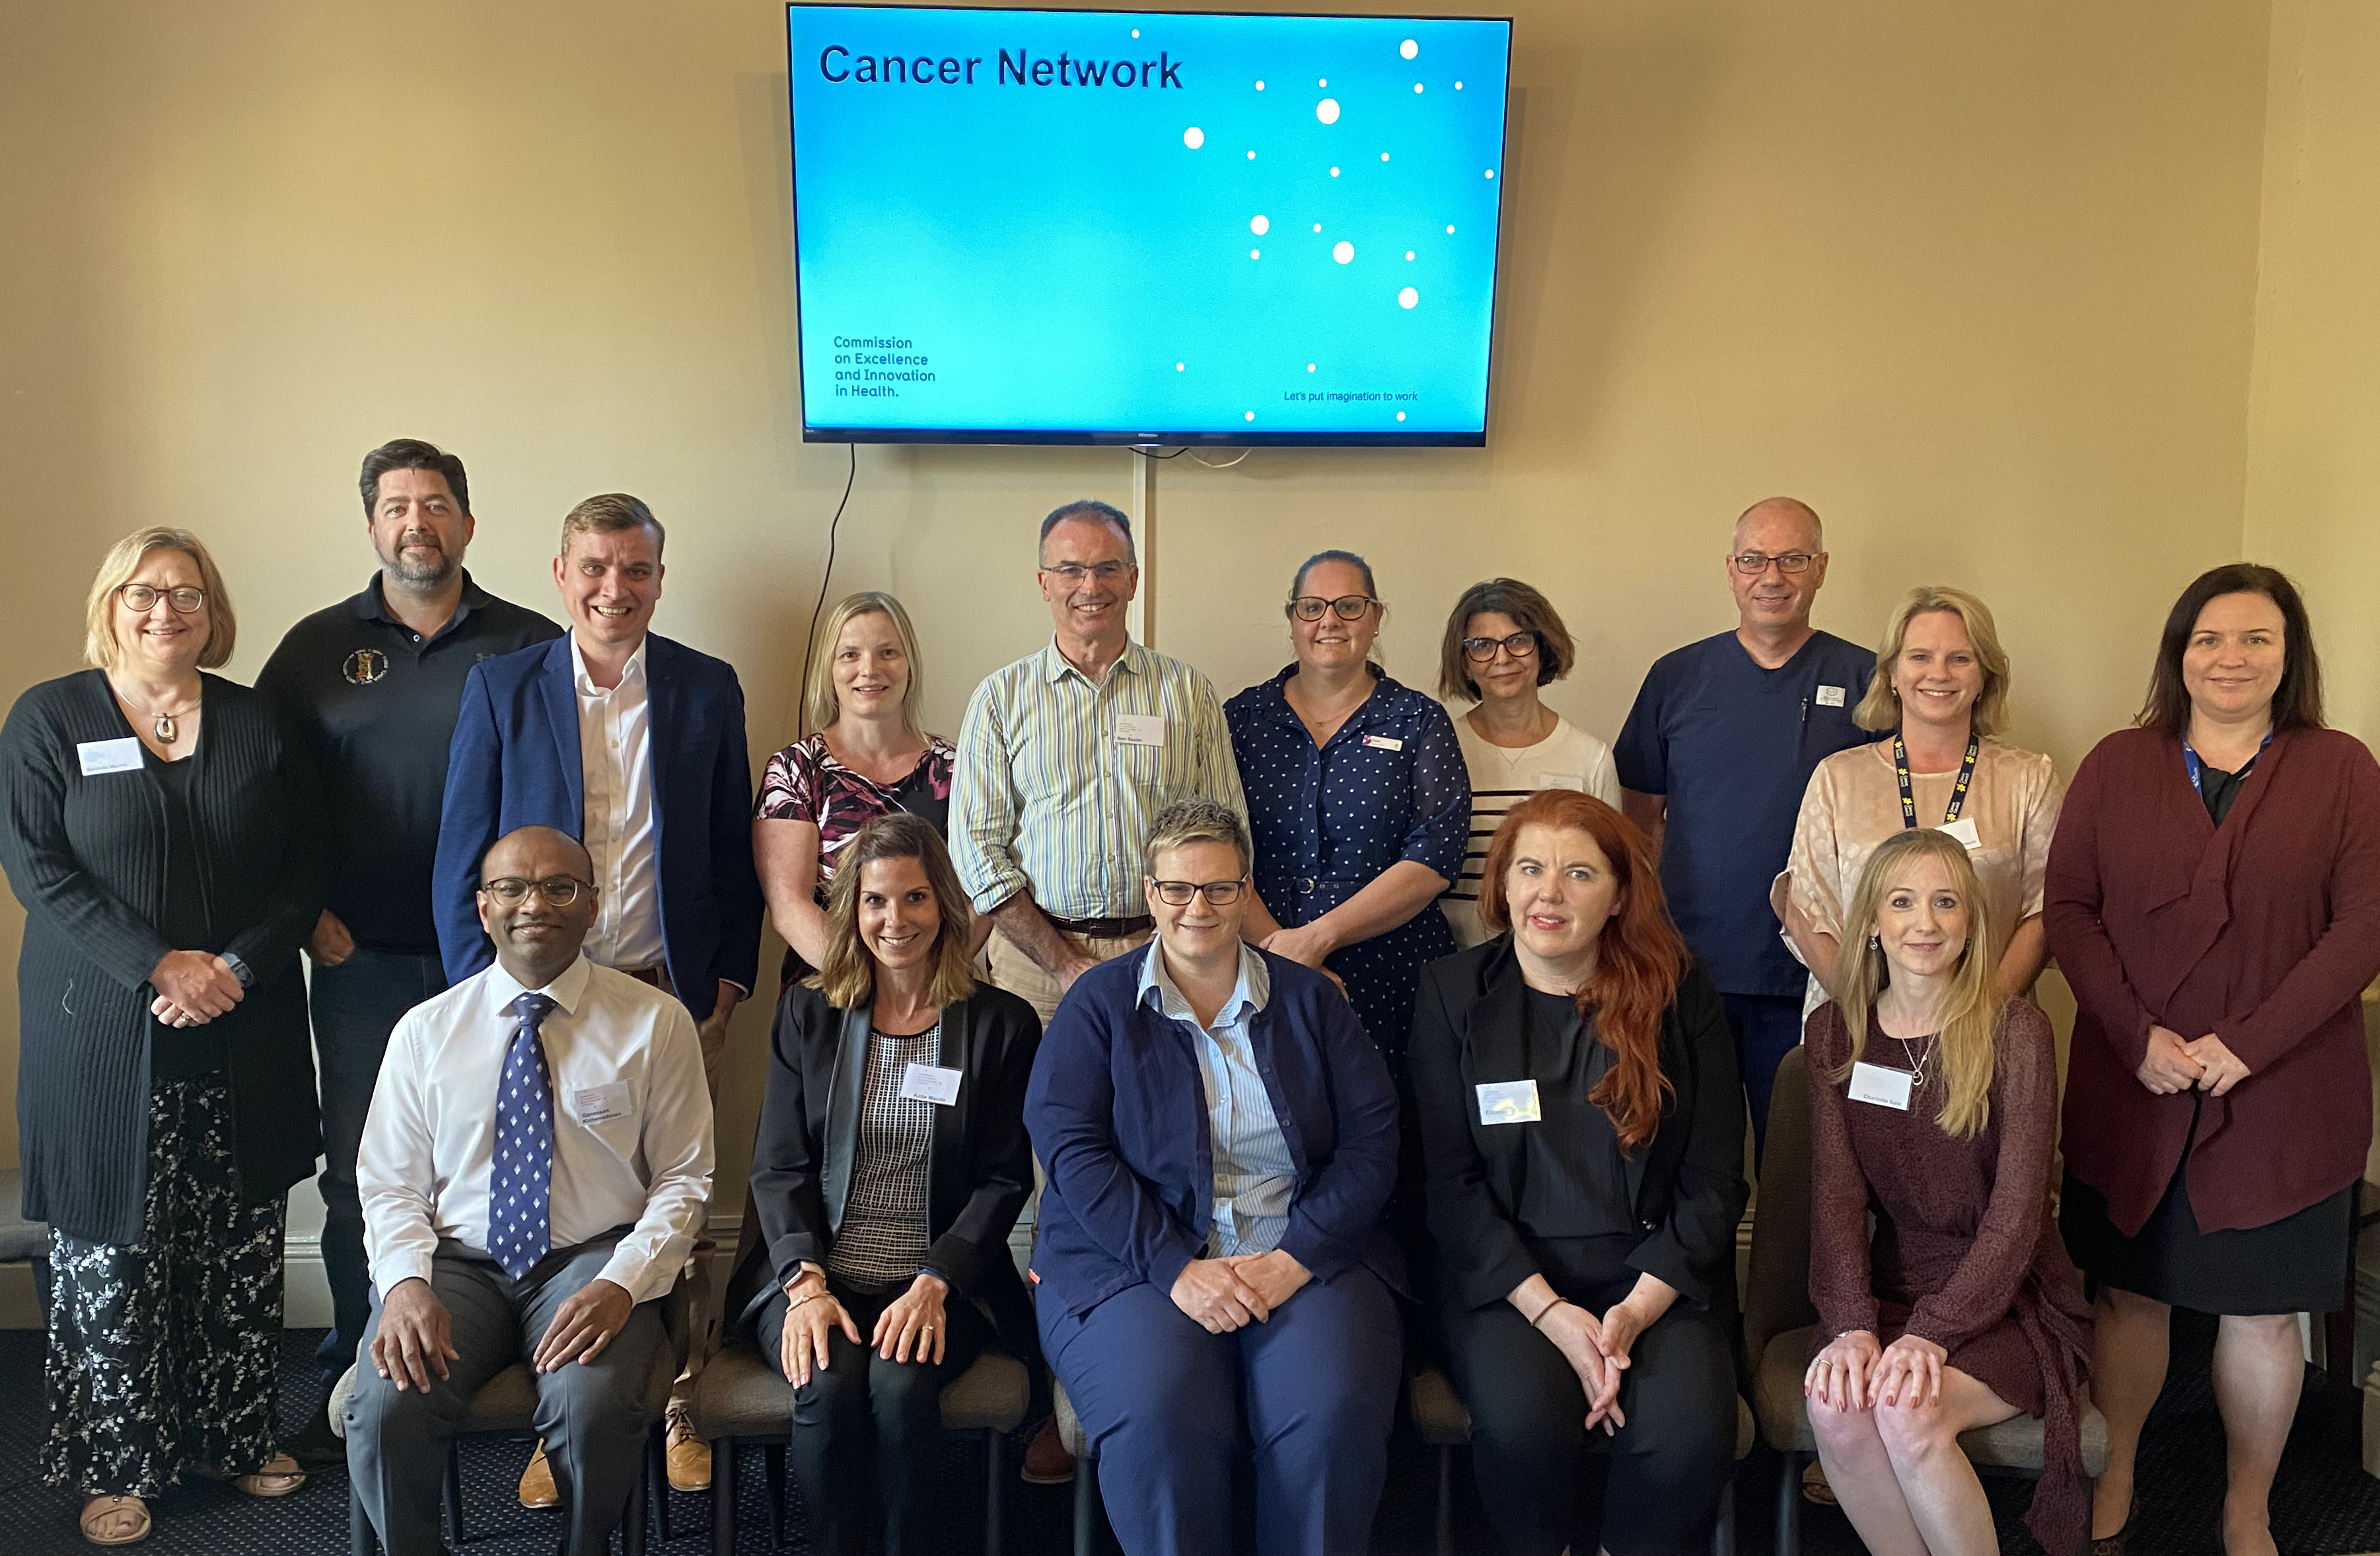 Group photo showing the members of the Cancer Clinical Network Steering Committee